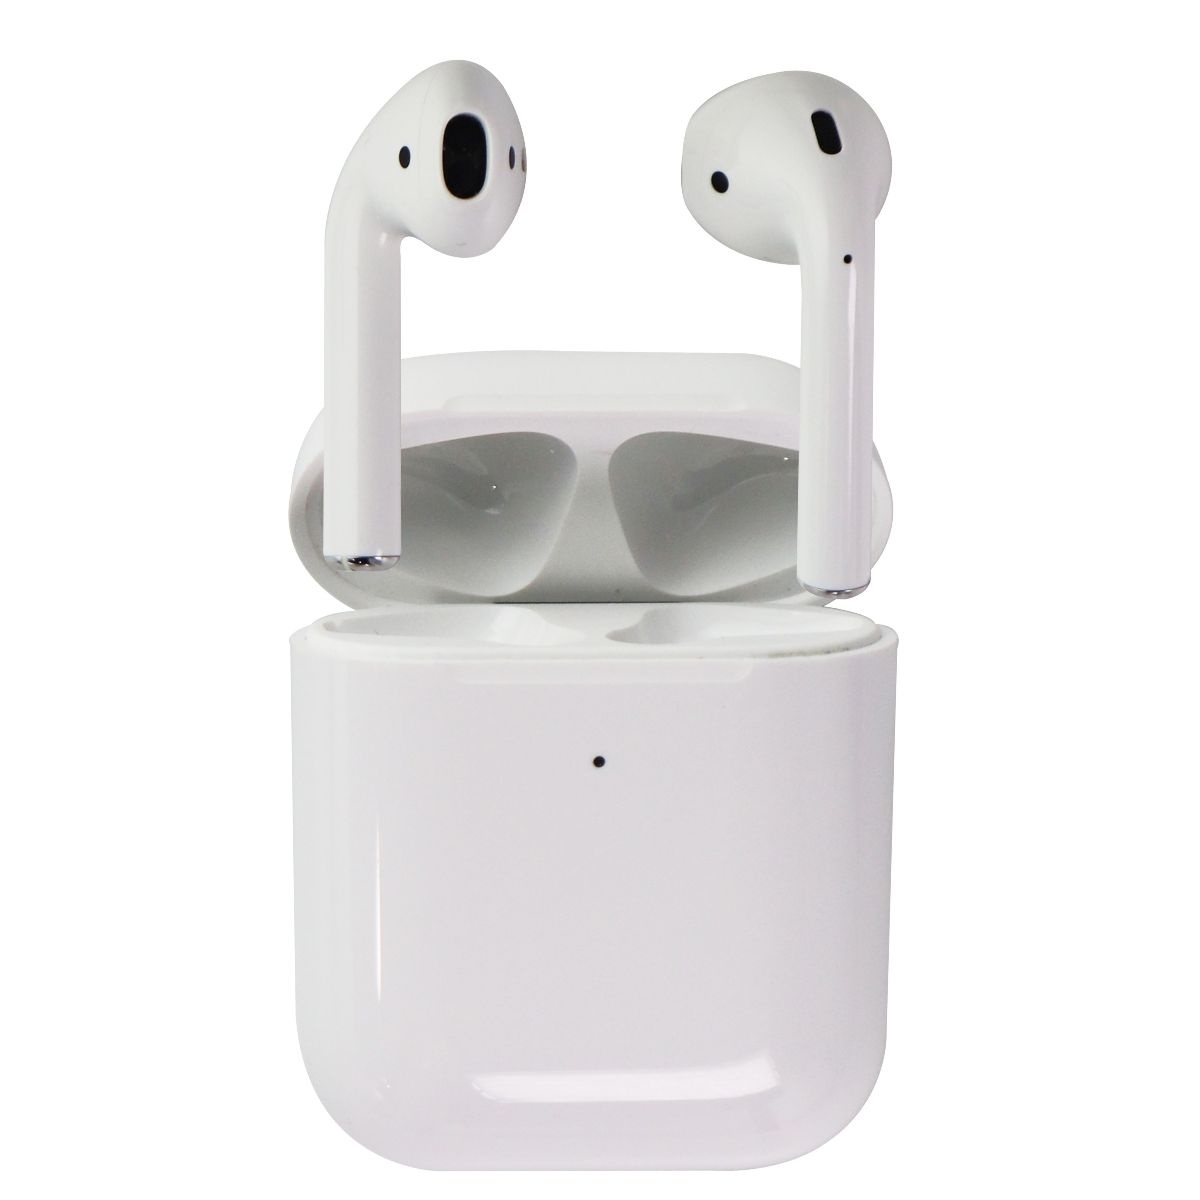 Apple AirPods (2nd Gen) With Qi Wireless Charging Case (MRXJ2AM/A) - White